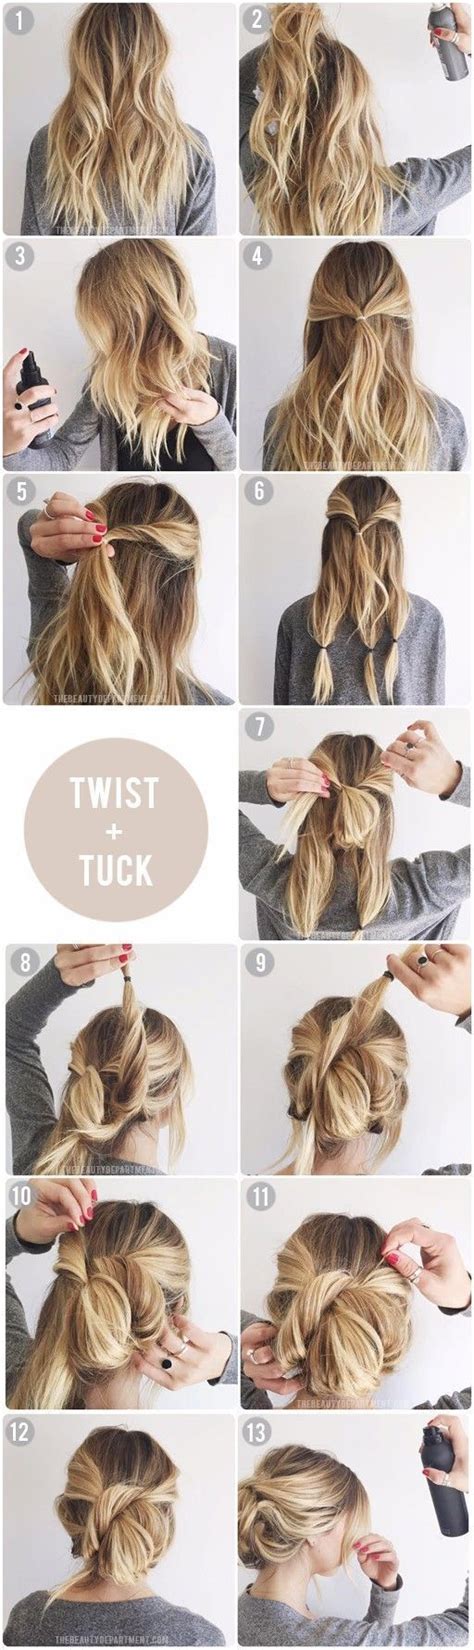 Fresh Cute Ways To Put Hair Up For Work Trend This Years